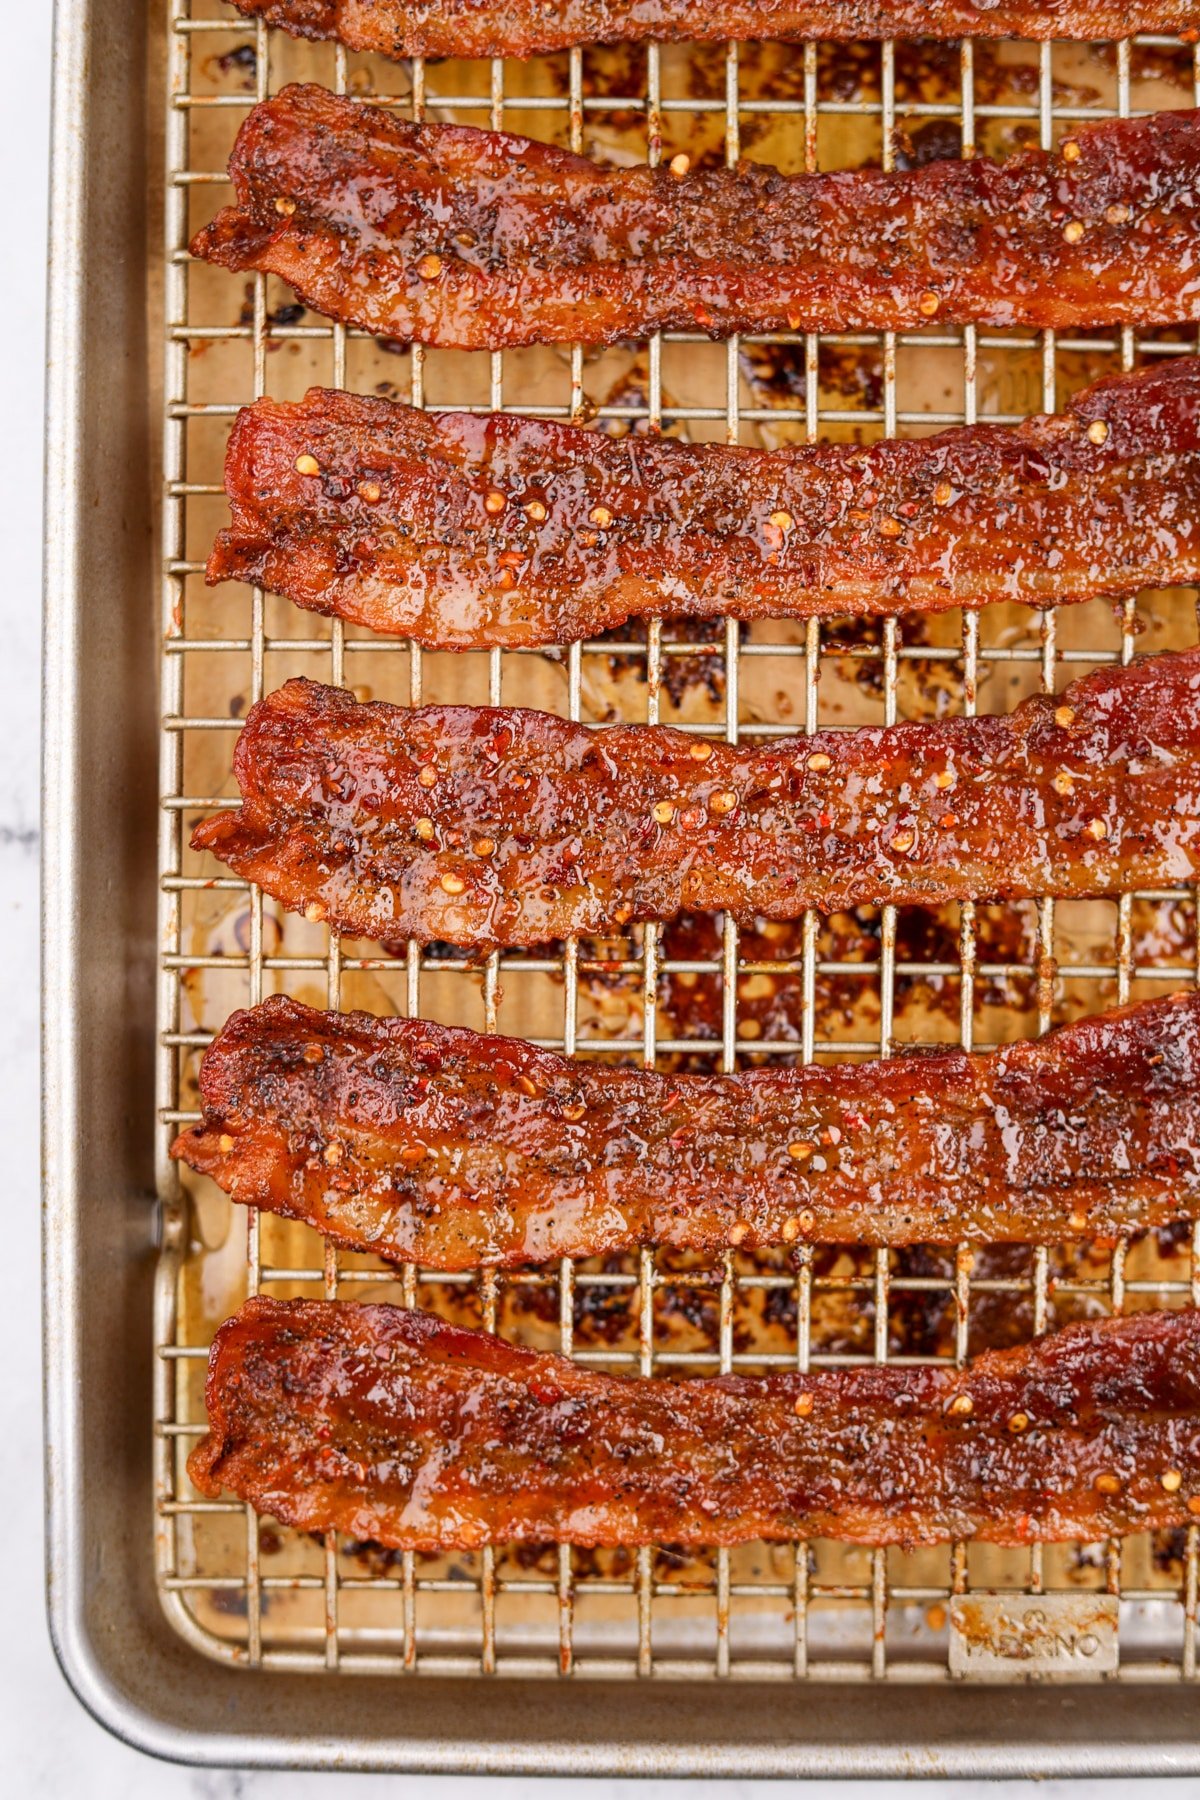 A baking rack filled with cooked crispy bacon.